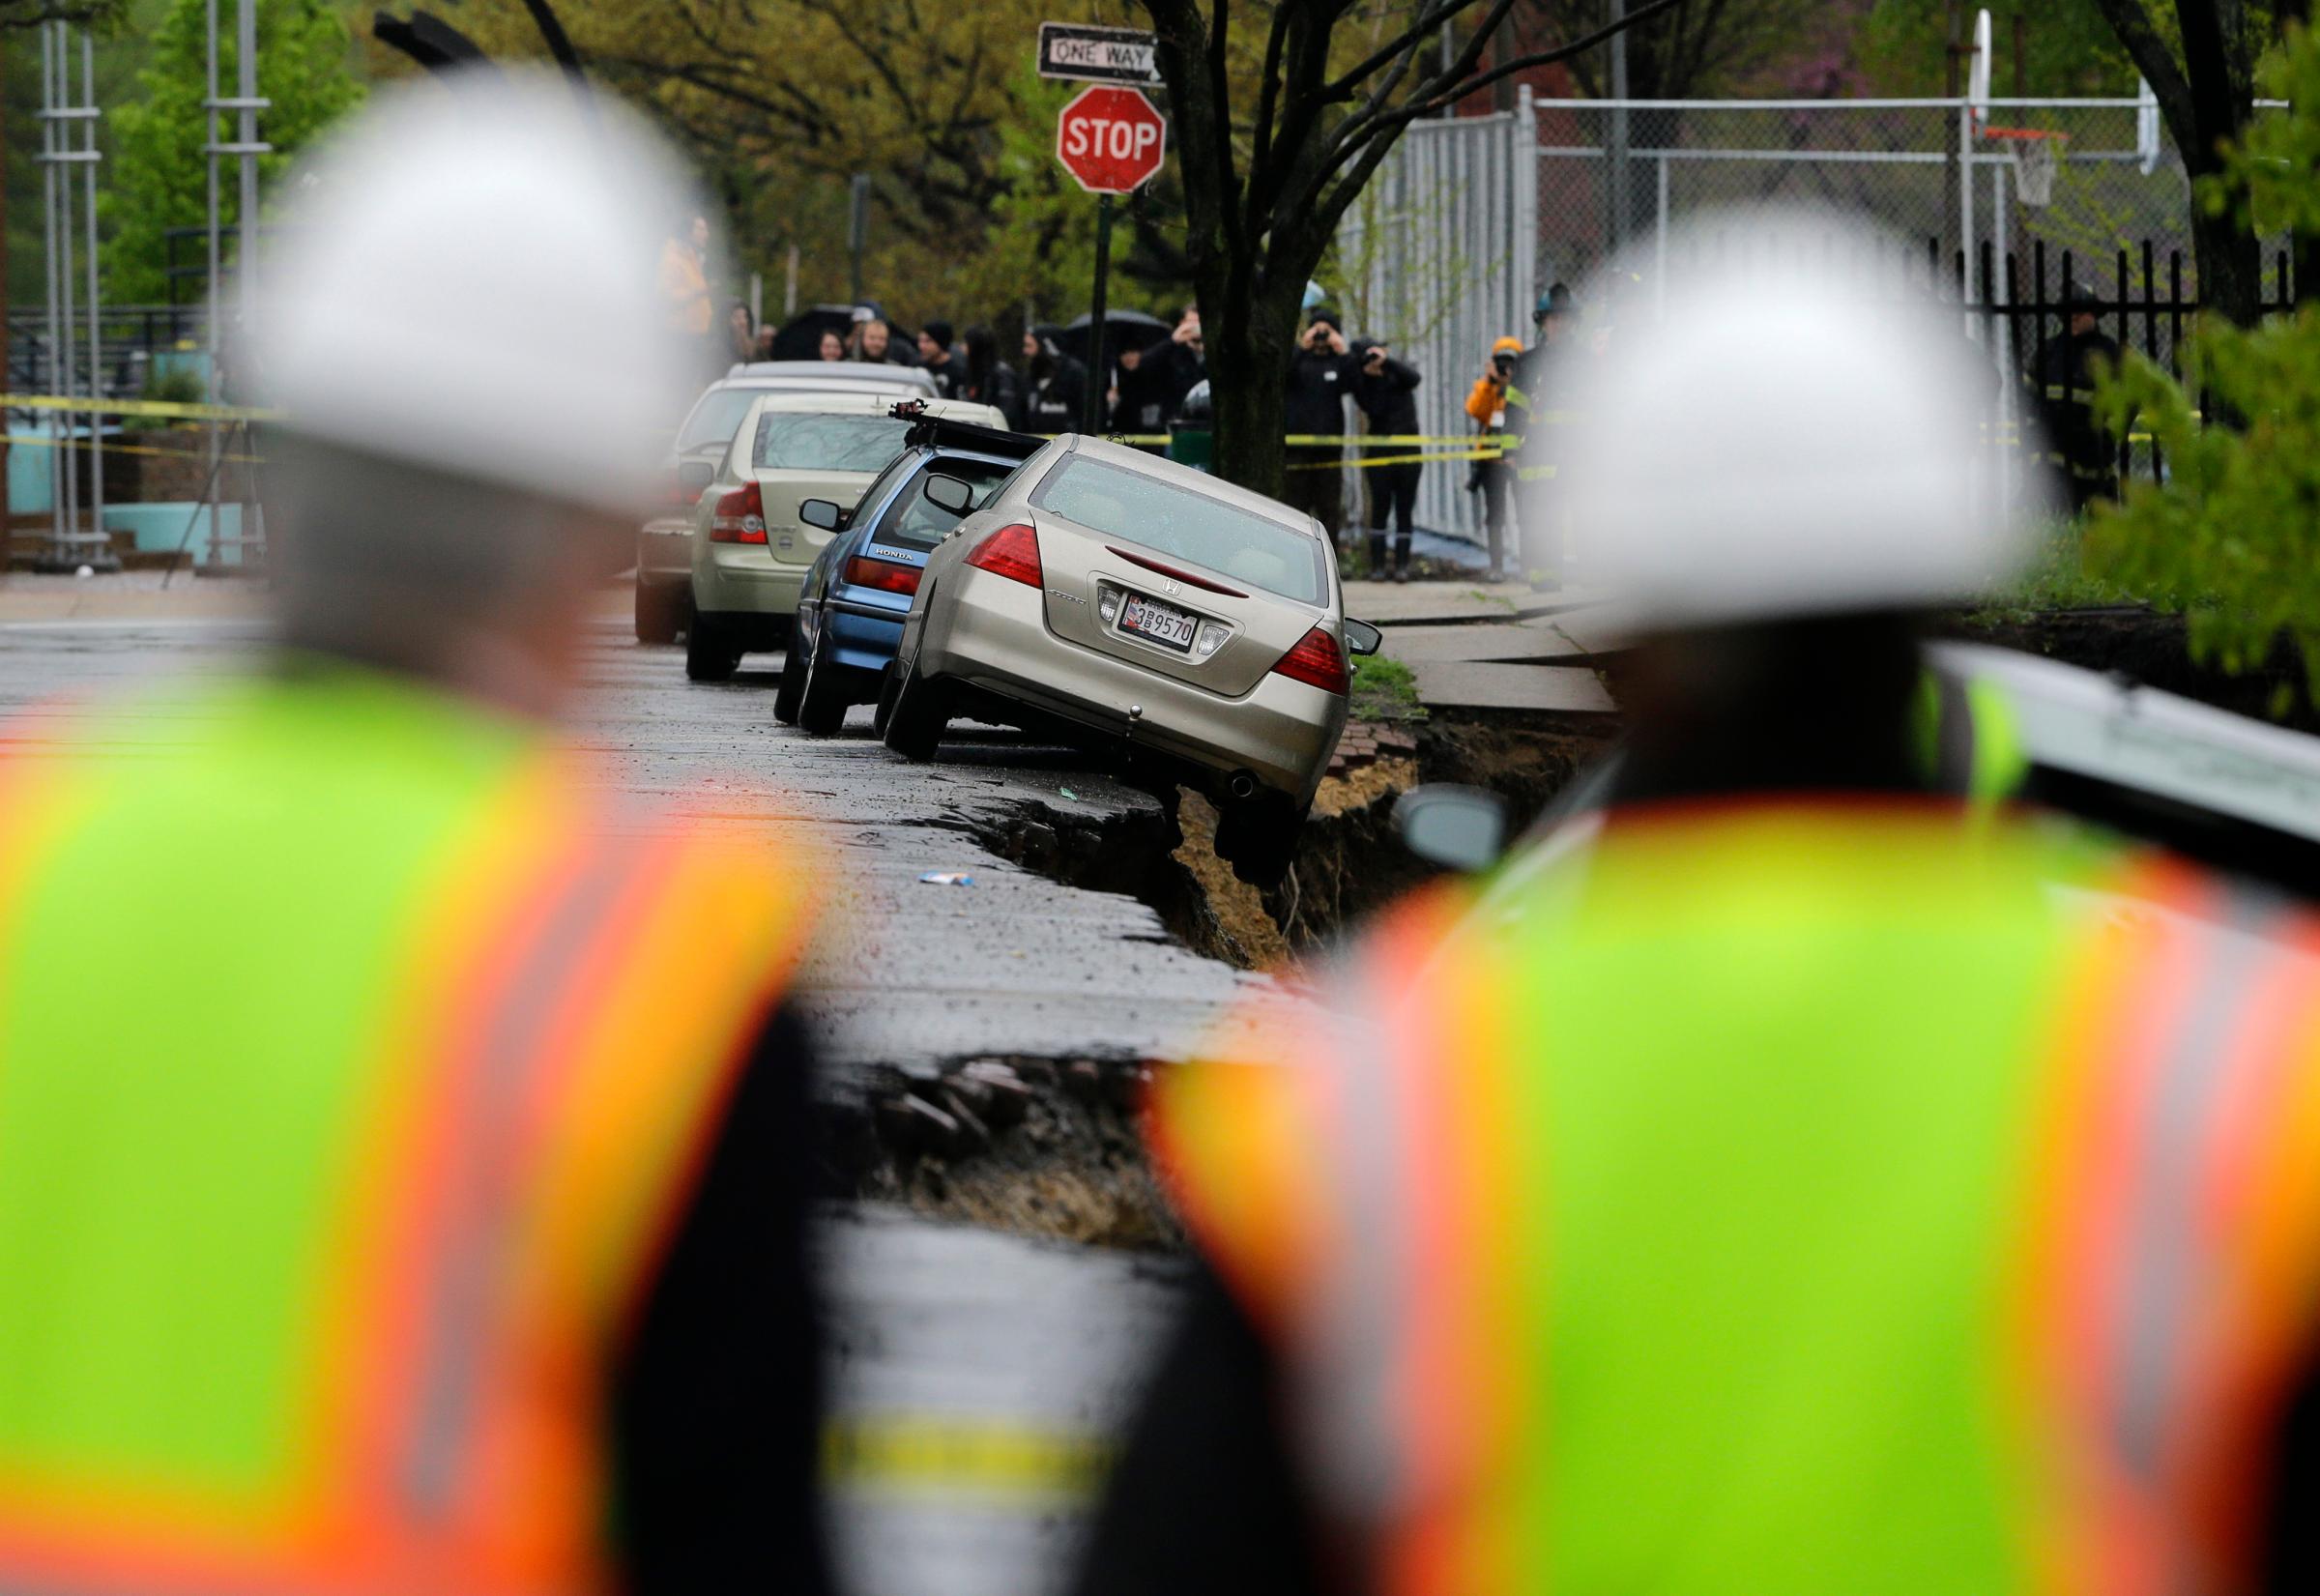 Emergency officials approach cars on the edge of a sinkhole in Baltimore, April 30, 2014.